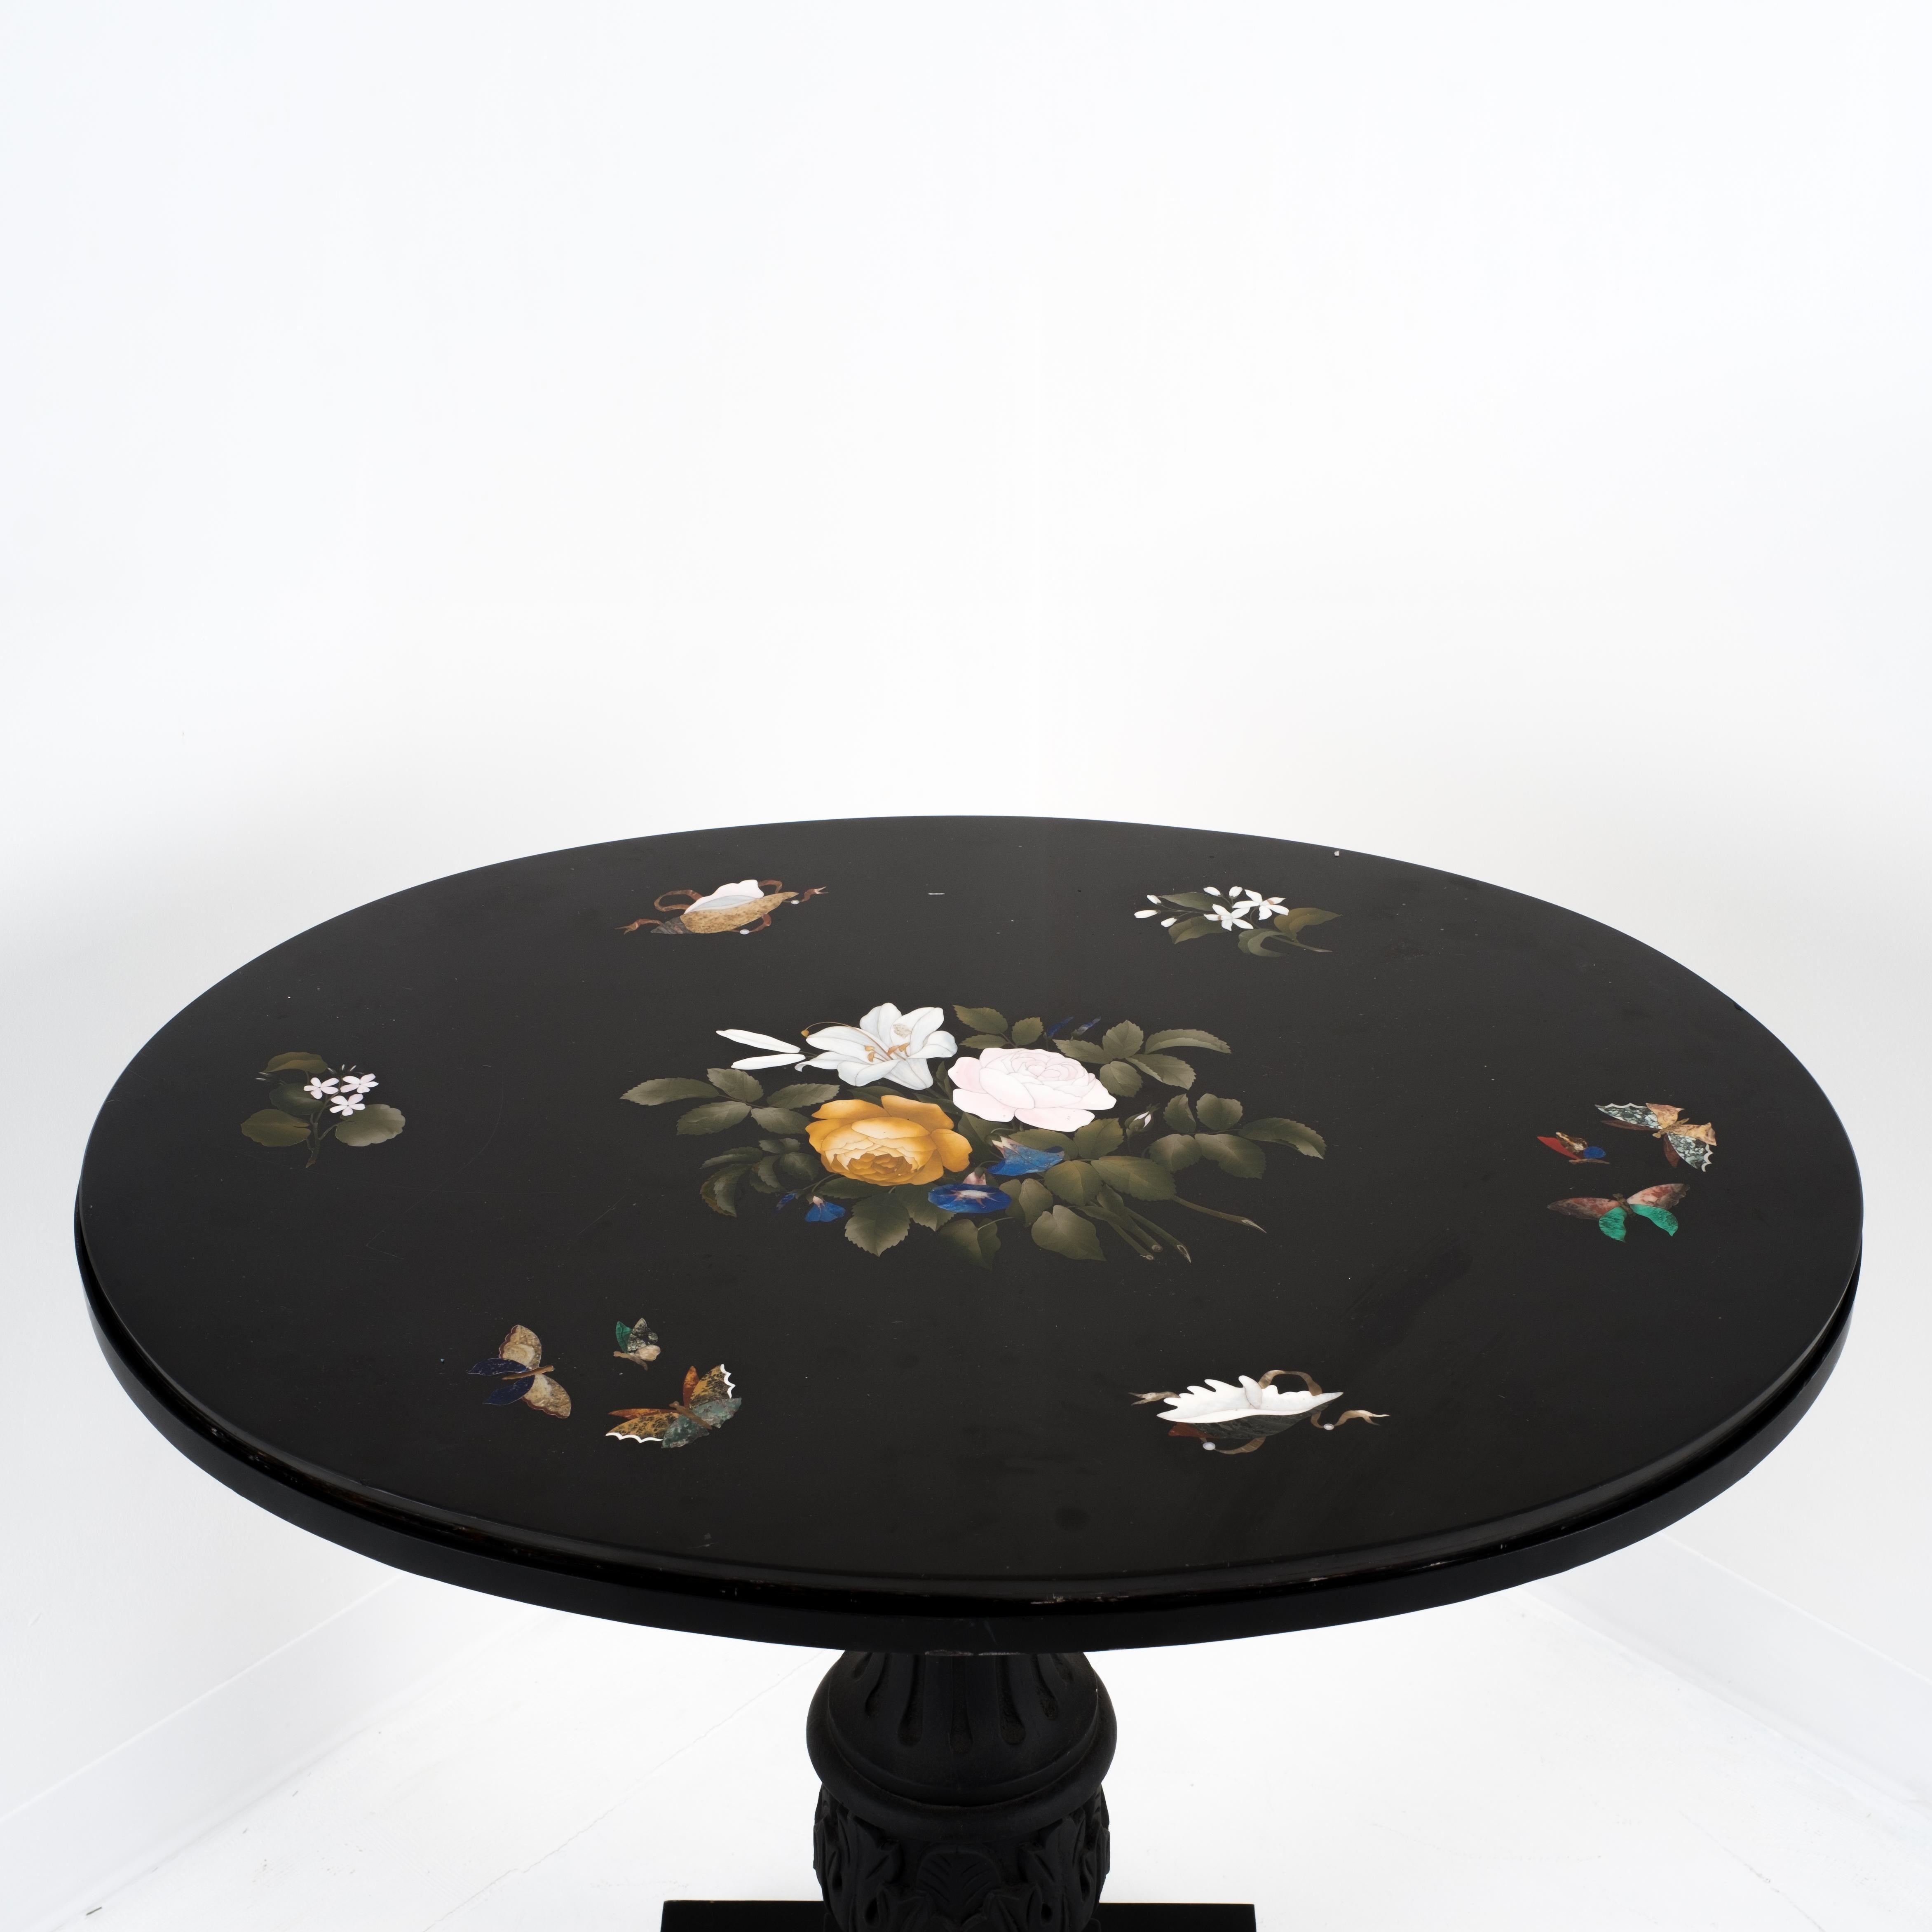 Traditional oval Pietra Dura table top of black marble inlaid with naturally colored stone creating a bouquet of yellow roses with a white oriental lily. Surrounding the central inlay are pairs of inlays spaced equidistantly around the perimeter.